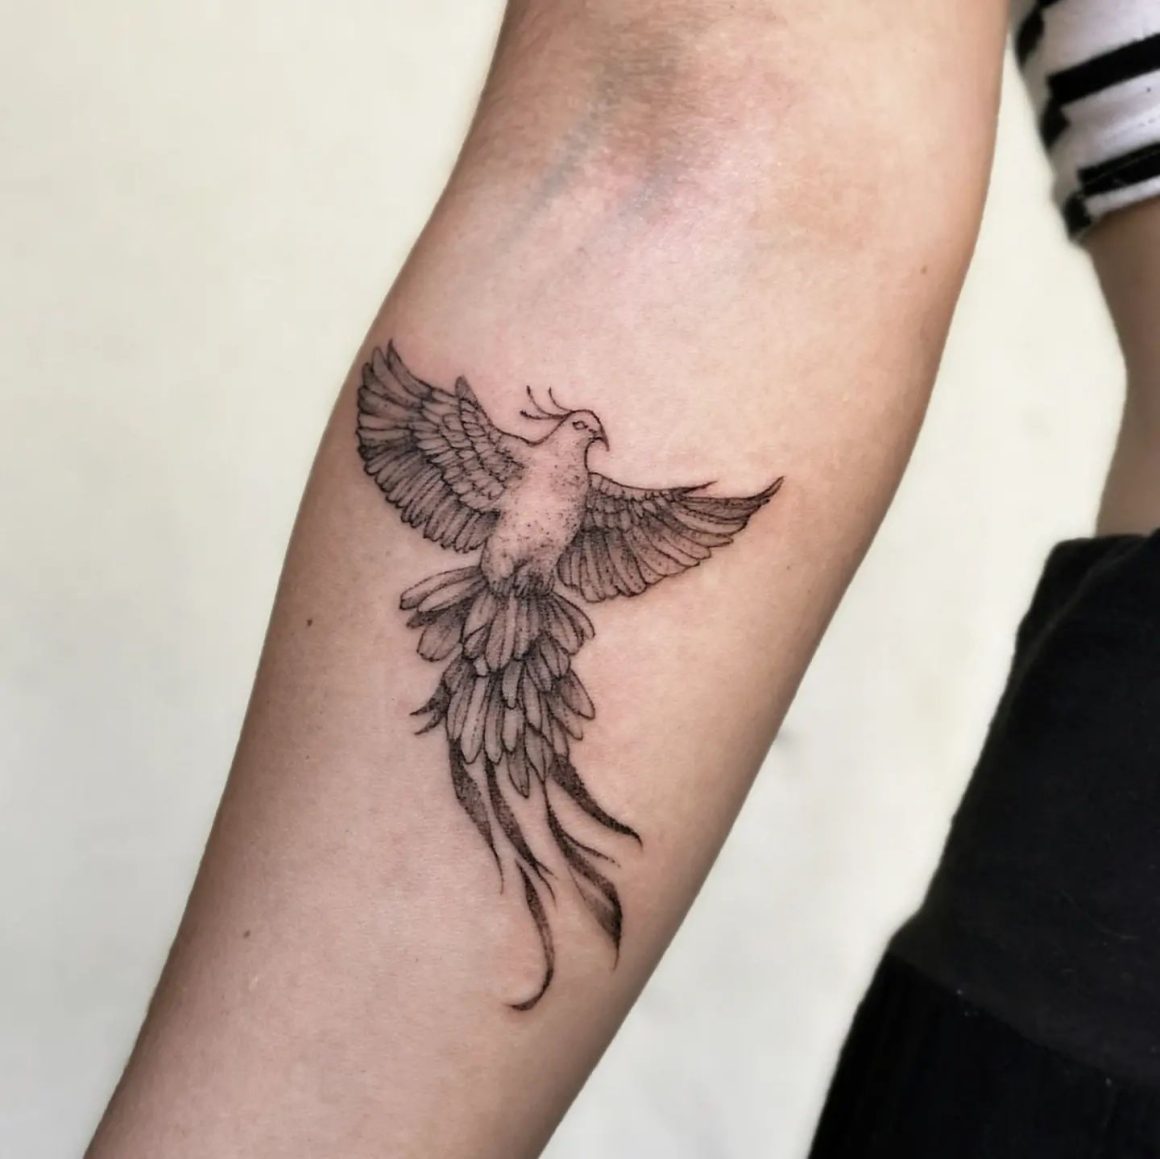 30+ Dove Tattoo Ideas: Small, Large, Meanings and Ideas - 100 Tattoos